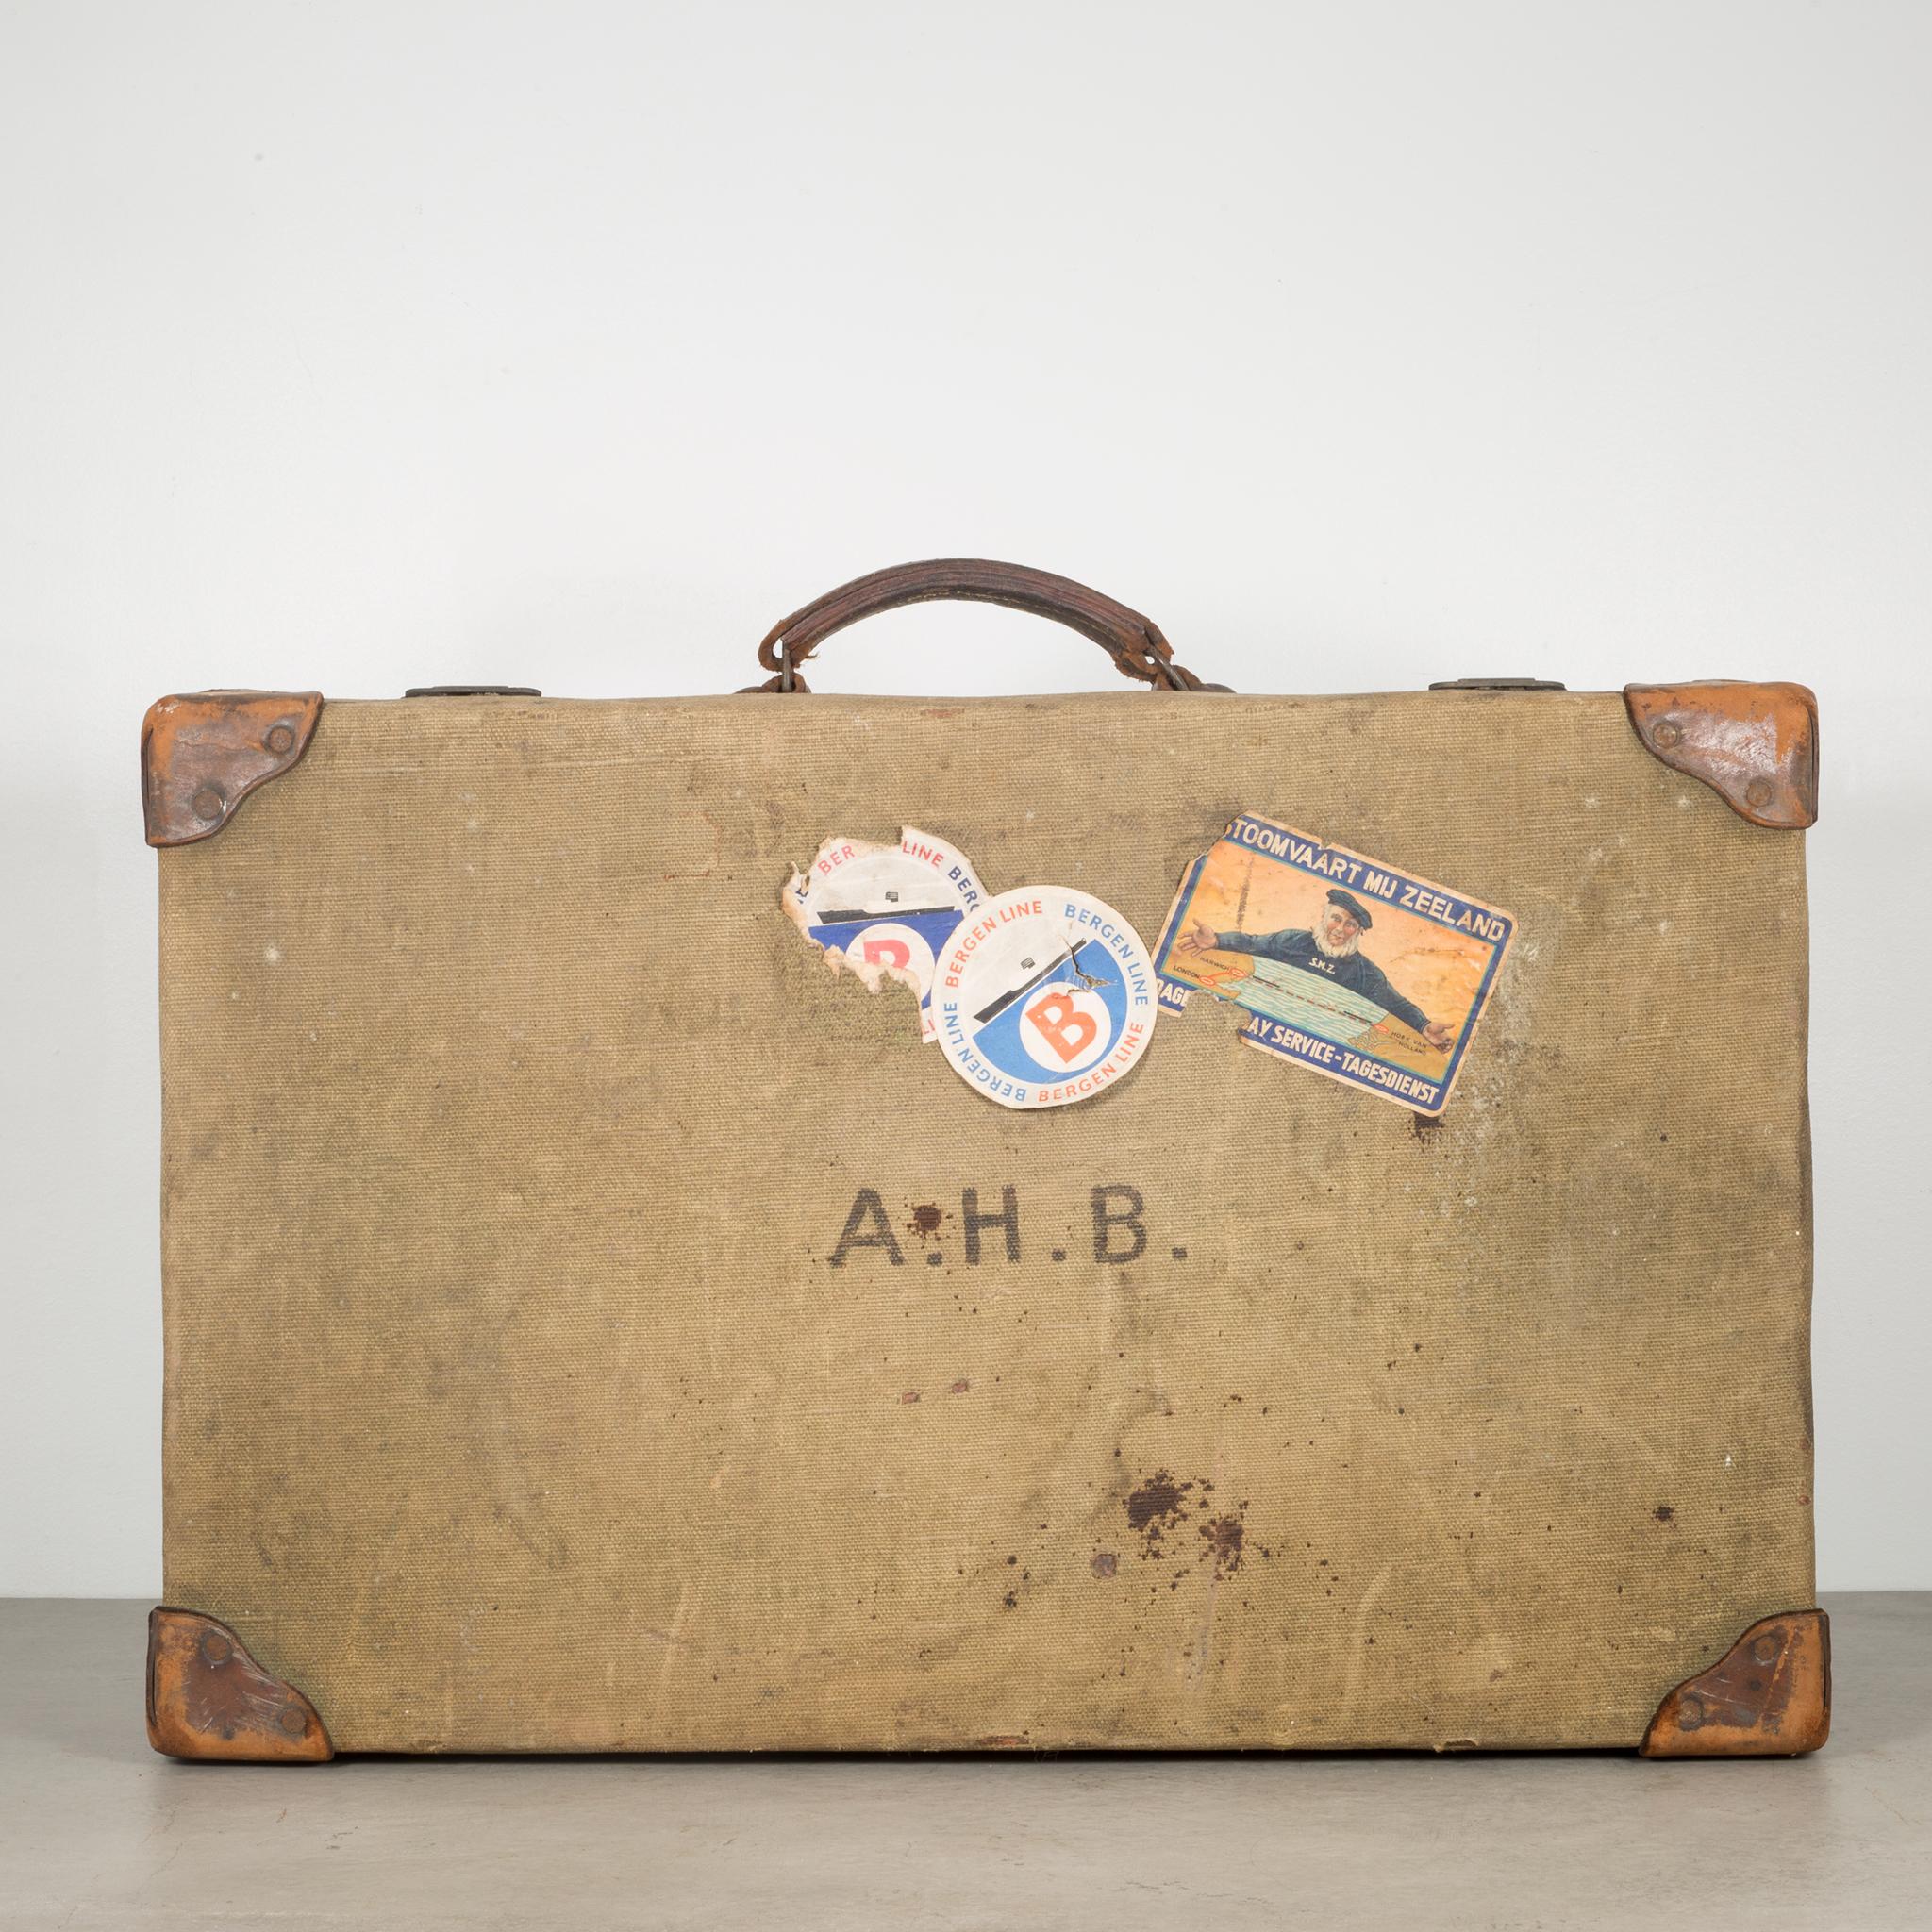 About

This a vintage canvas suitcase with leather handle and corners and original travel stickers. The locks are brass and open properly. The suitcase is monogrammed 